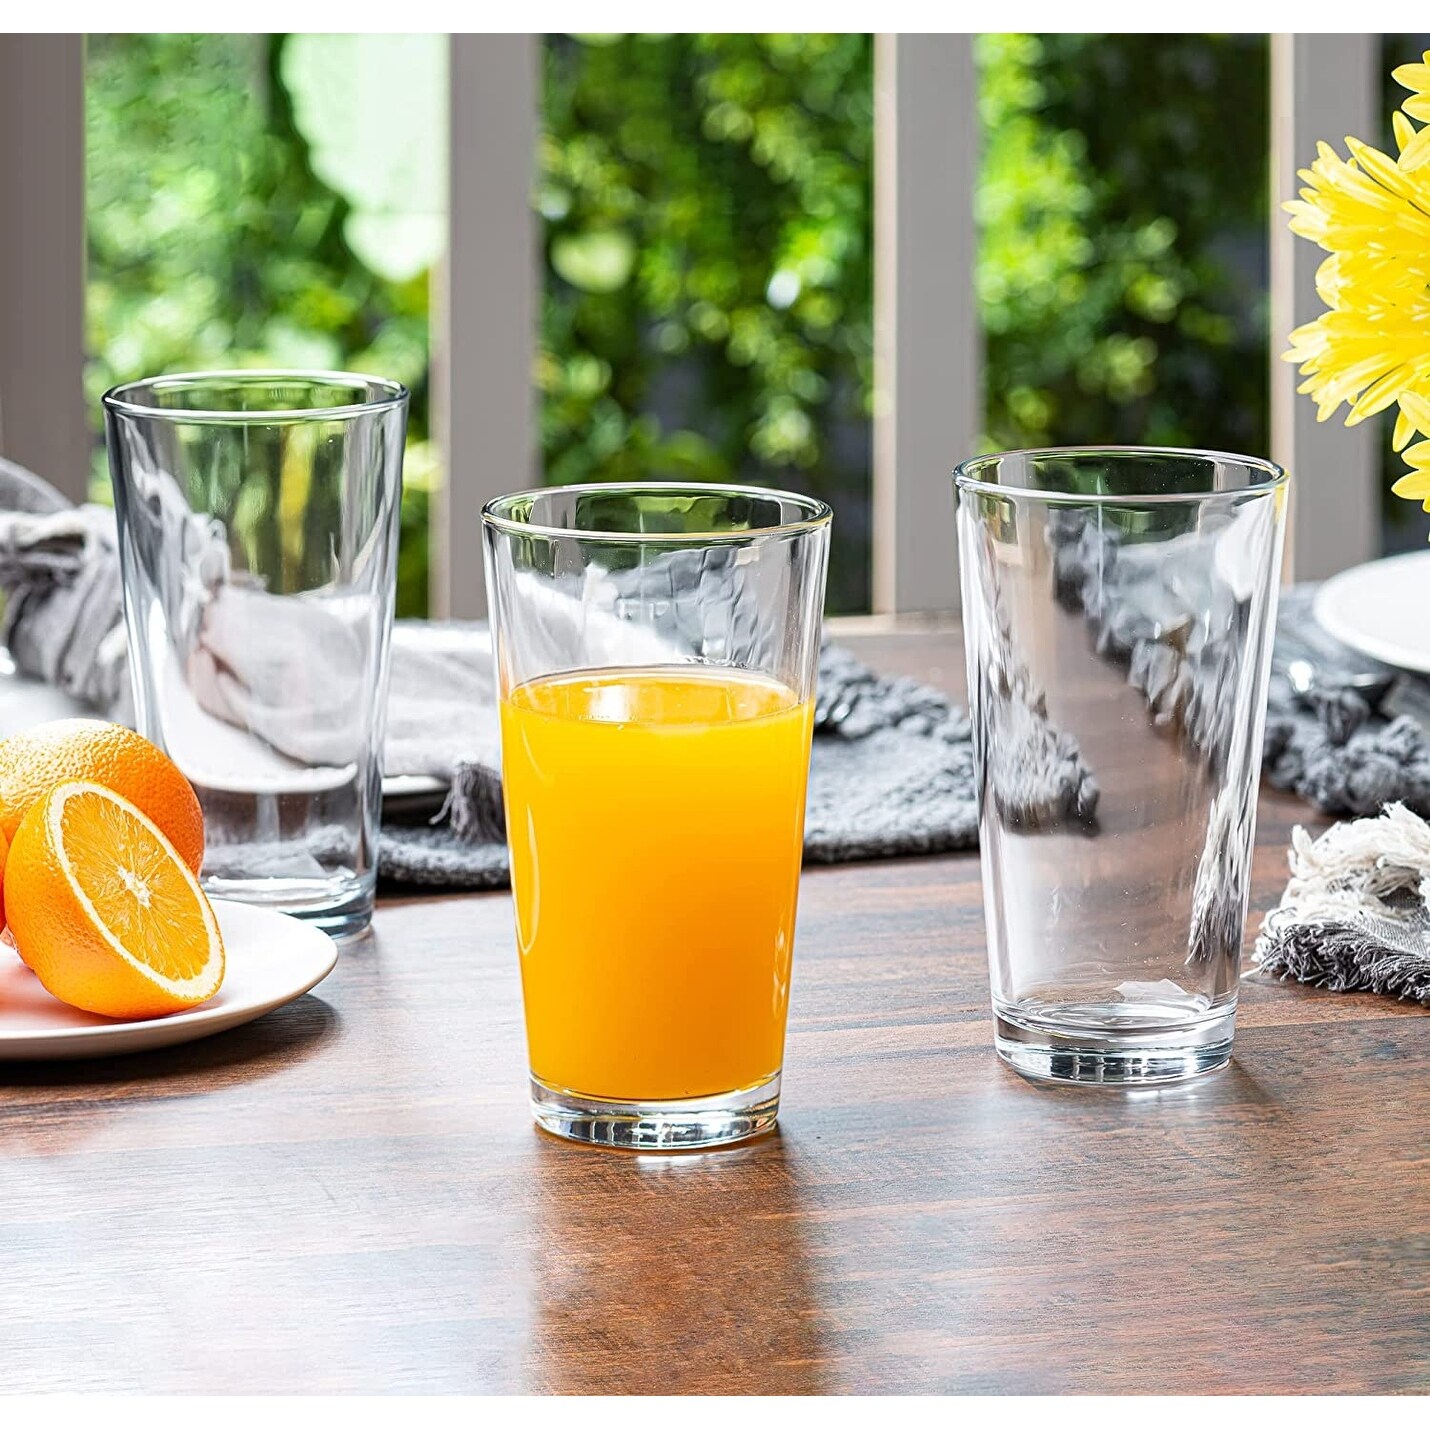 https://ak1.ostkcdn.com/images/products/is/images/direct/c340649ea8d483c54f9dadcca851e1d7ffb40b6b/Le%27raze-Drinking-Glasses---Set-of-10-%2816oz.%29.jpg